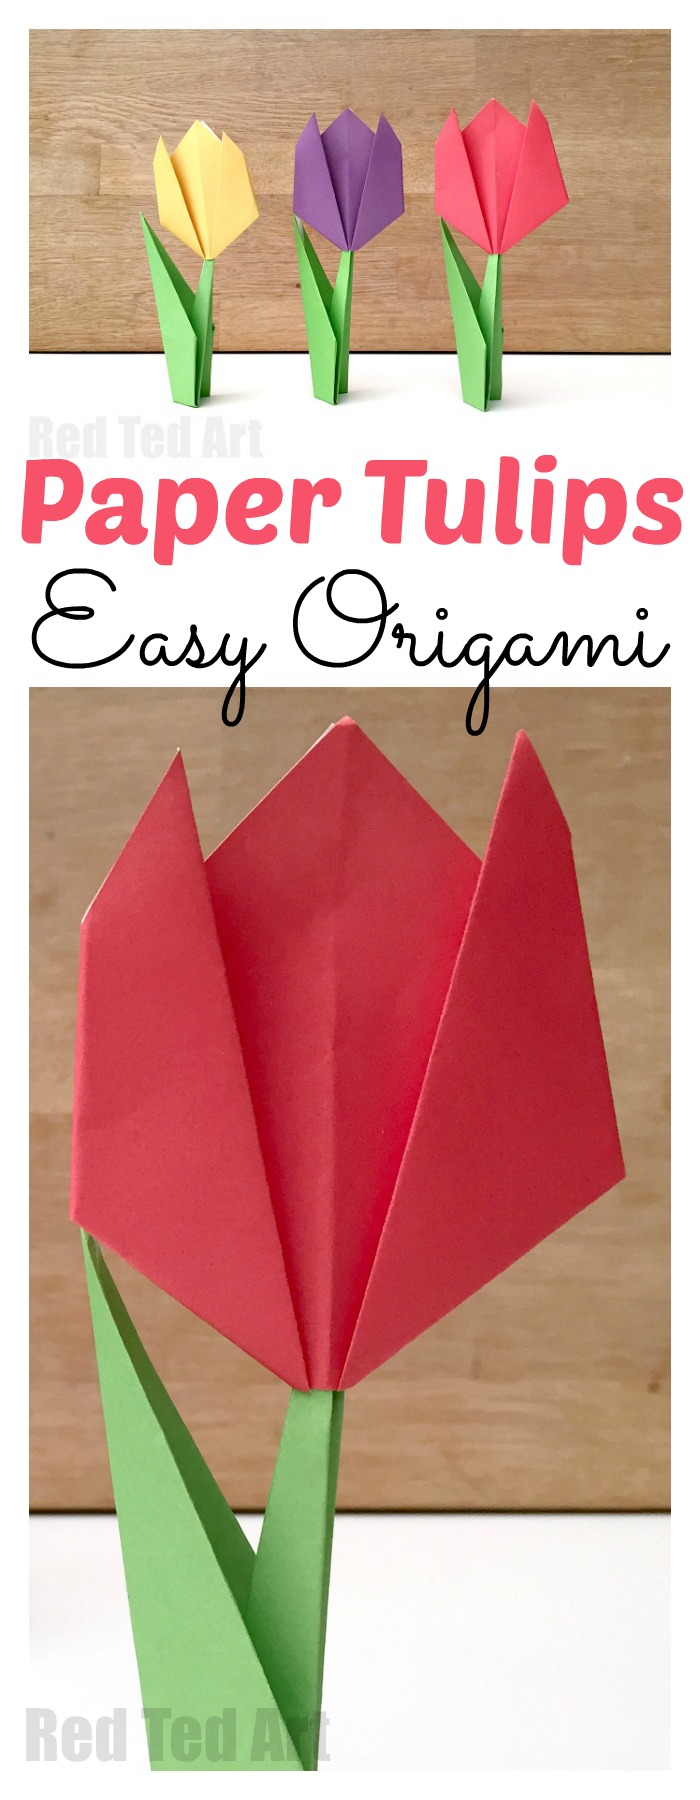 How To Make An Origami Tulip Easy Paper Tulip Red Ted Art